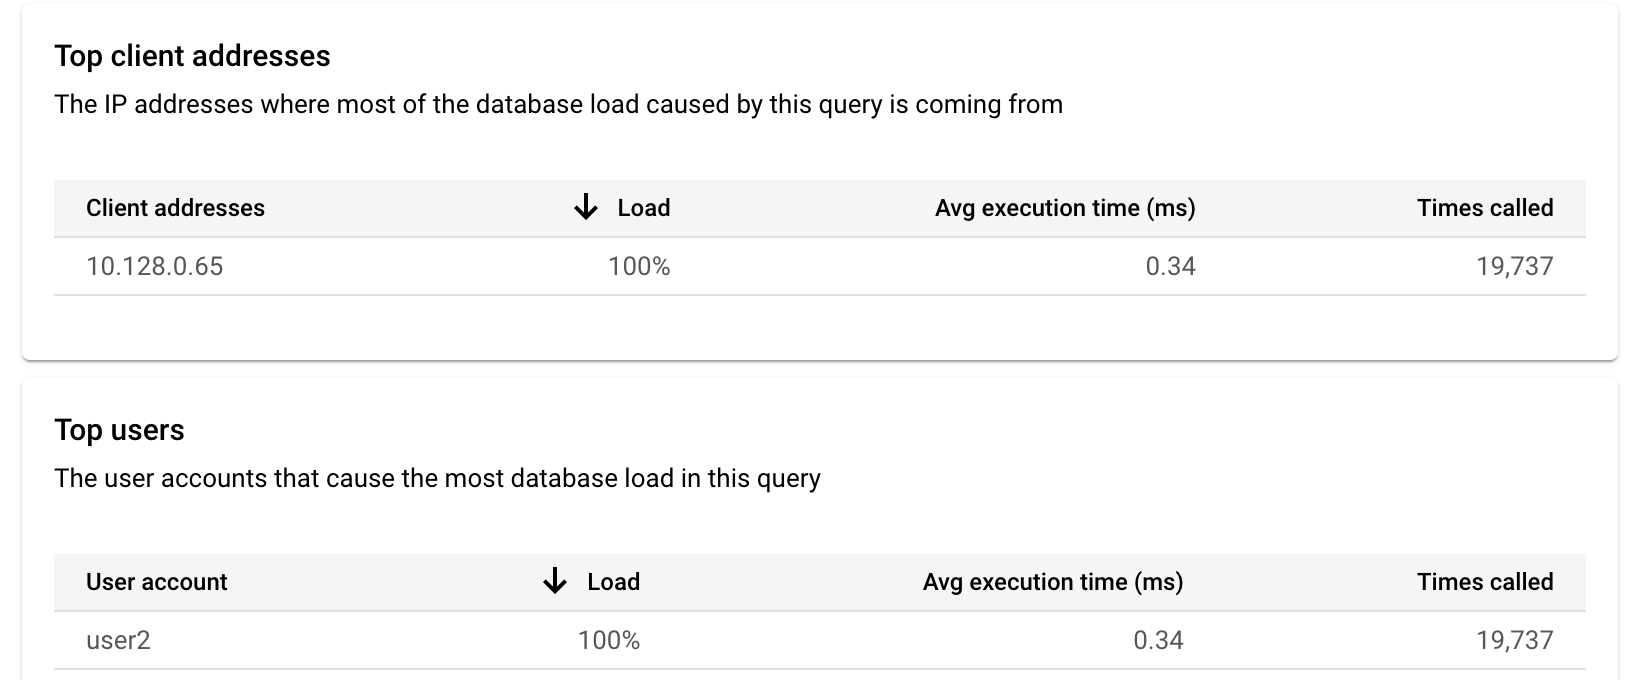 The image shows that for top client addresses, the load was
         100%, the average execution time was 19,568 seconds, and the times
         called was 1,226. For top users, the user postgres had 100% of the load,
         had an average execution time of 19,568 ms, and was called 1,226
         times.